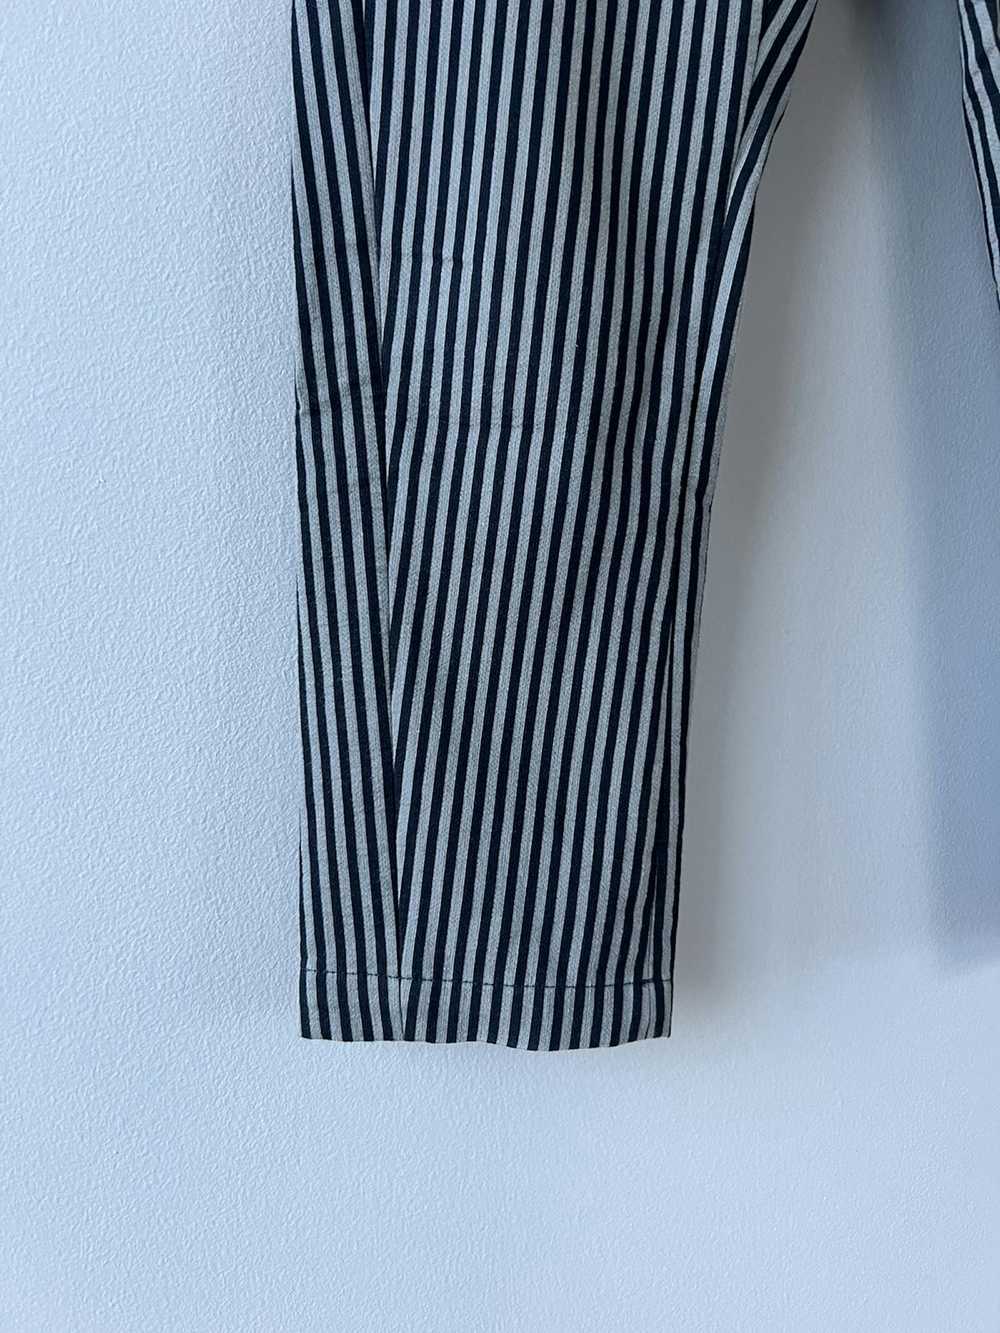 Ann Demeulemeester AW15 Striped Slim Trousers - image 2